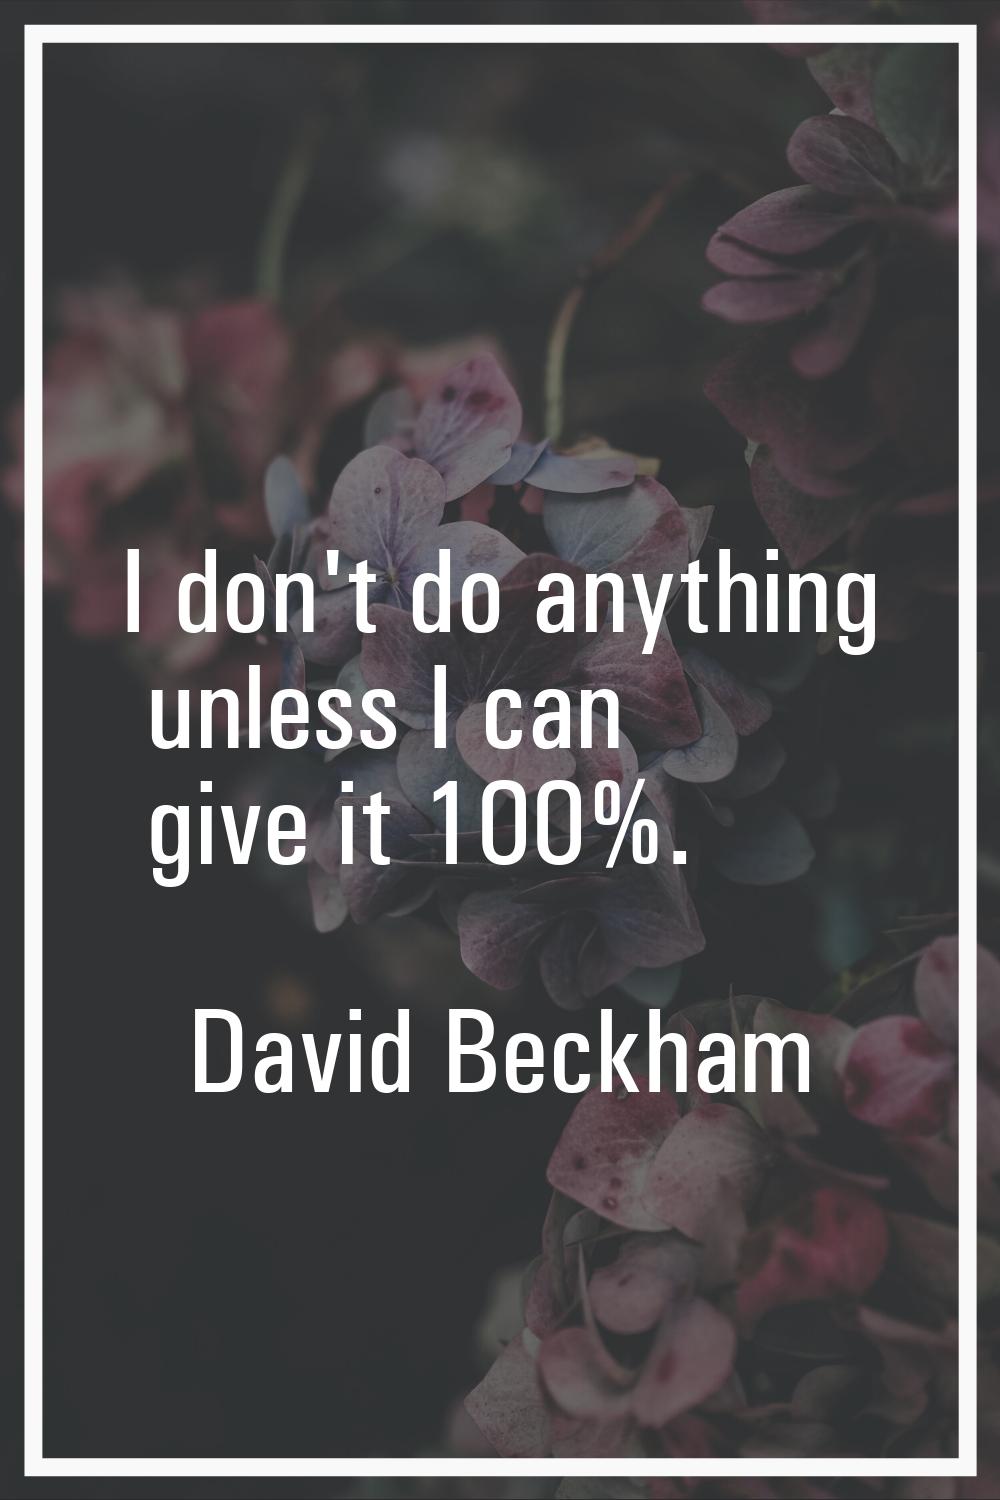 I don't do anything unless I can give it 100%.